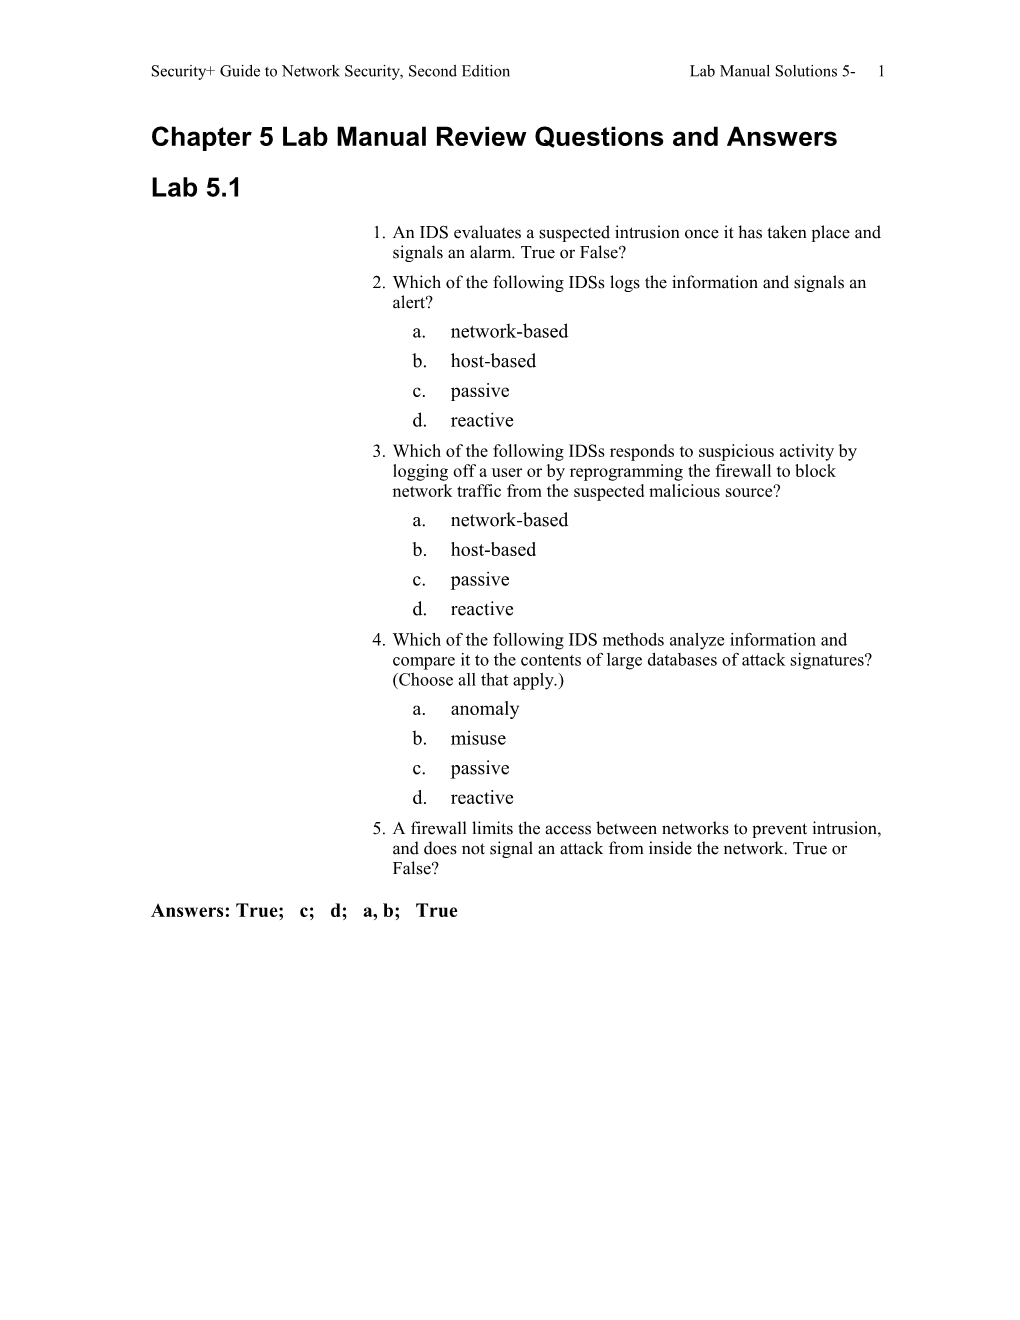 Chapter 5 Lab Manual Review Questions and Answers